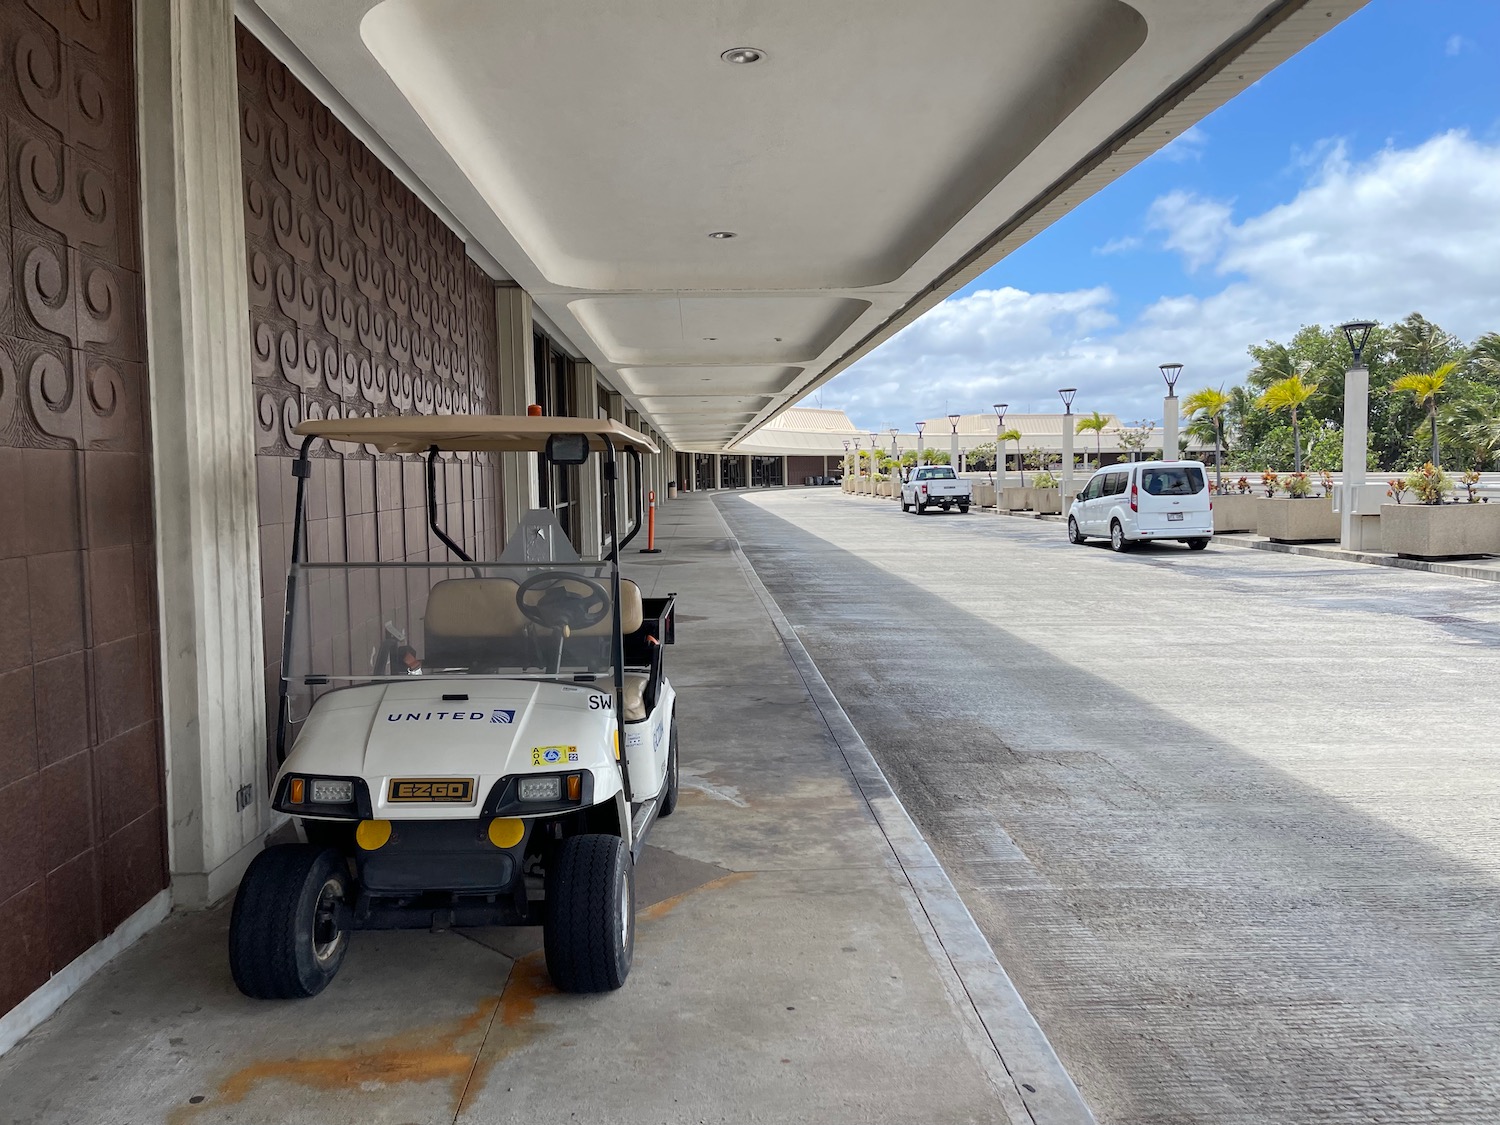 a golf cart parked in a parking lot